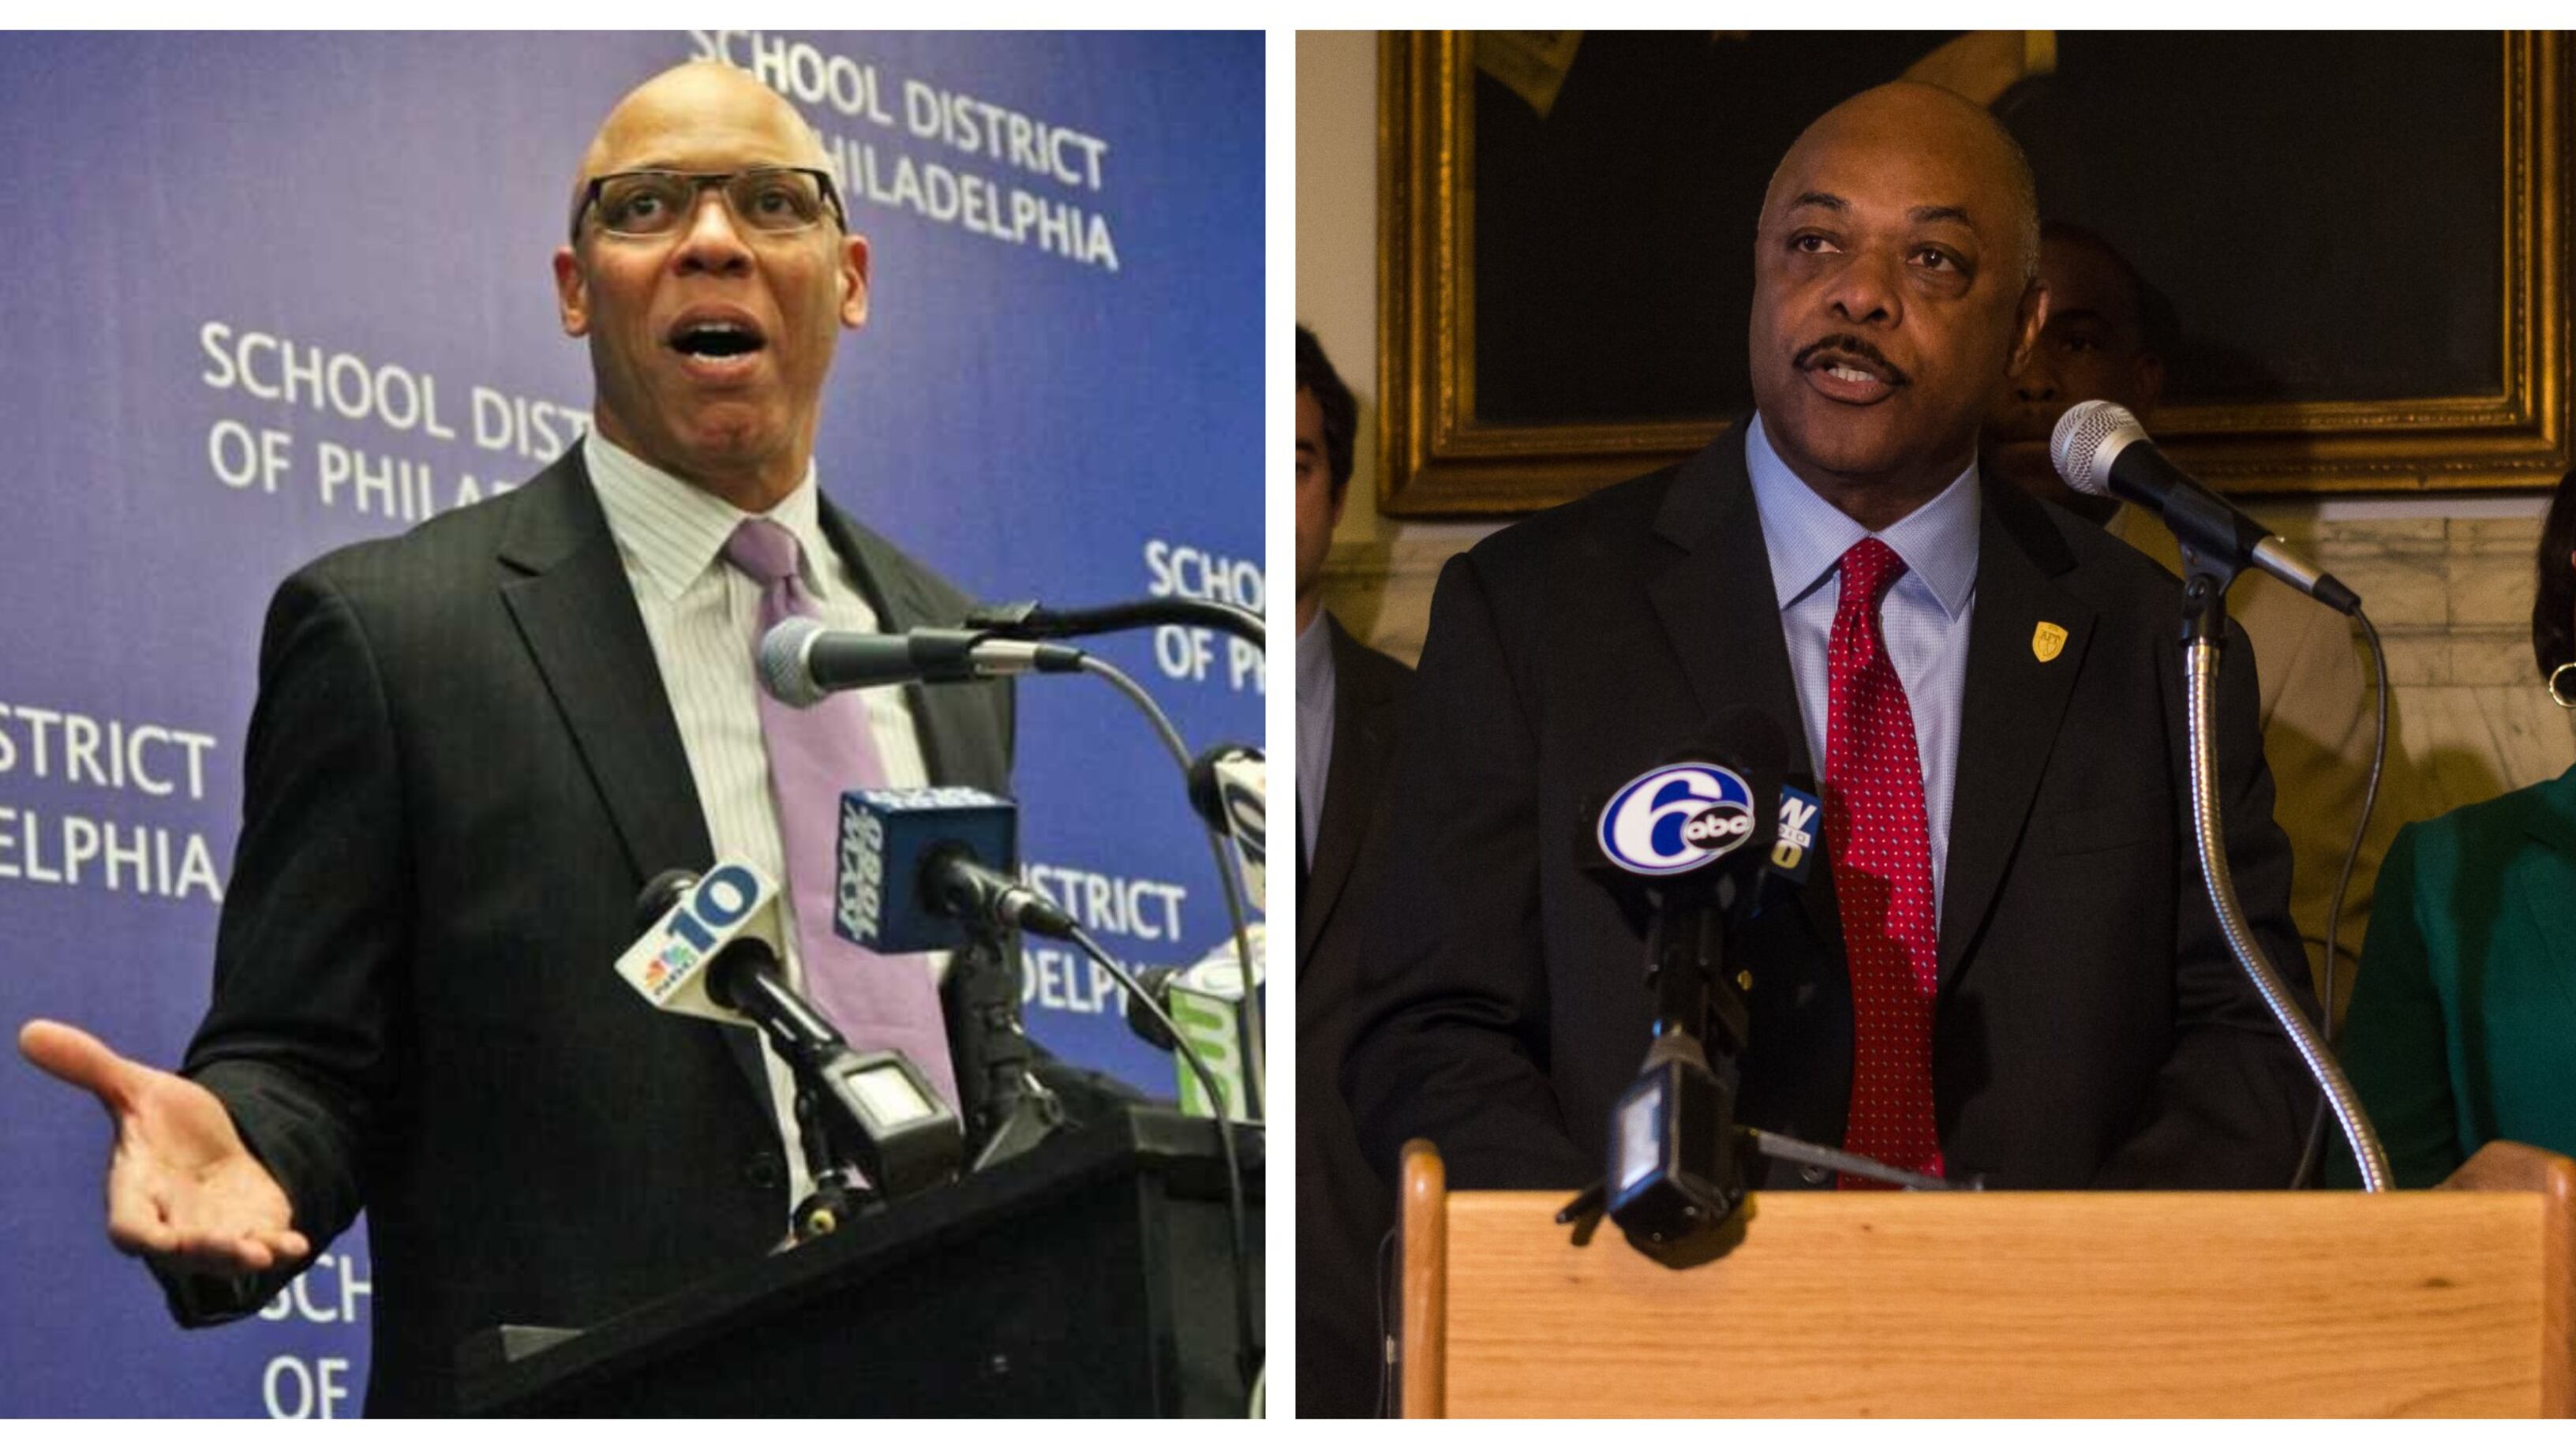 Split image of William Hite speaking at a microphone on the left and Jerry Jordan speaking at a microphone on the right.